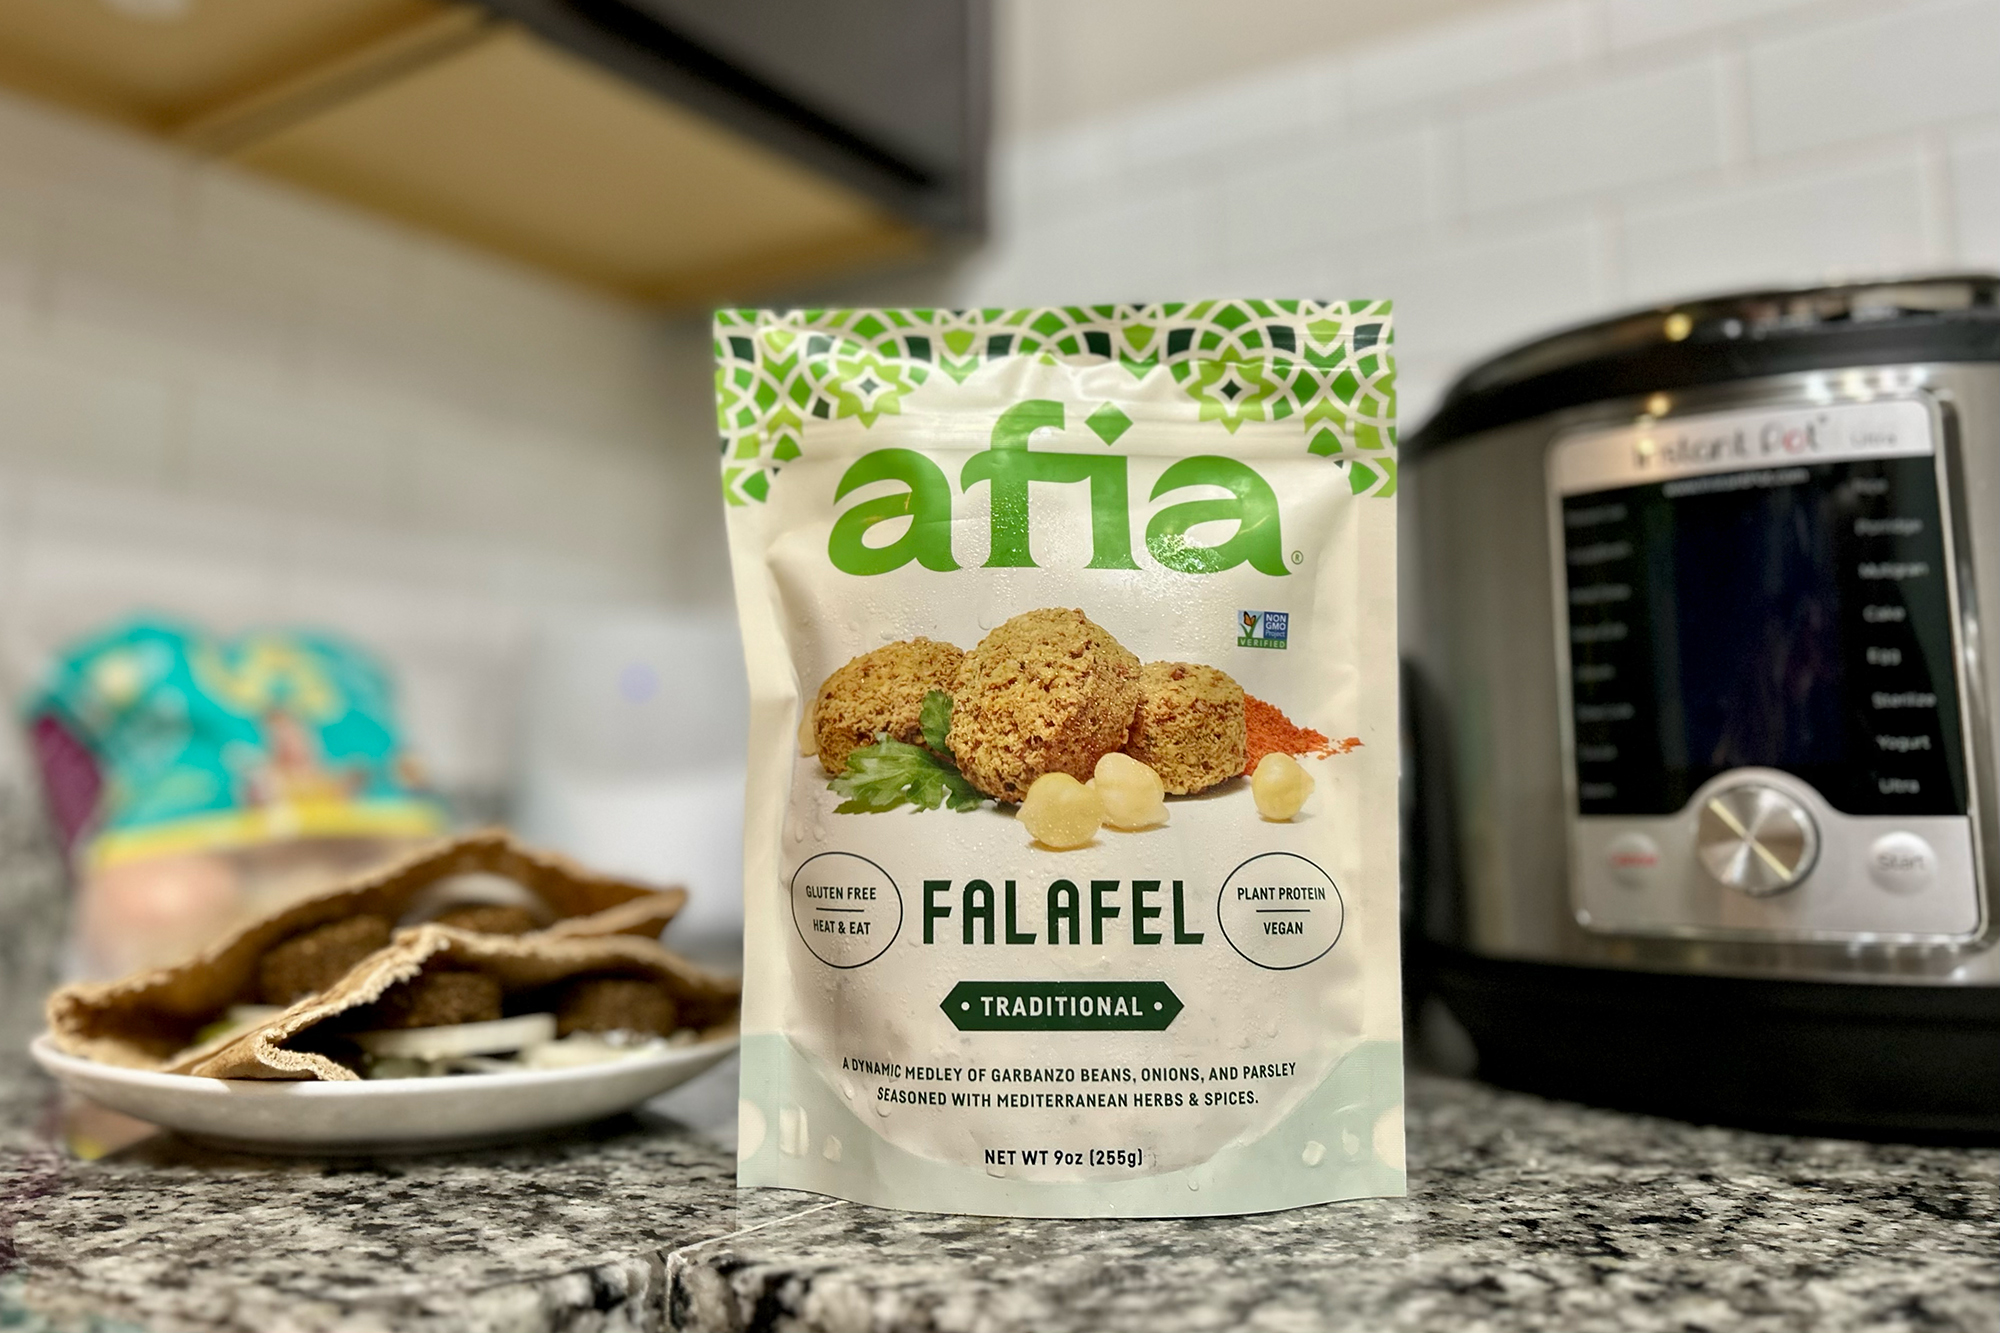 Afia Falafel packaging on the counter between a pita and an air fryer